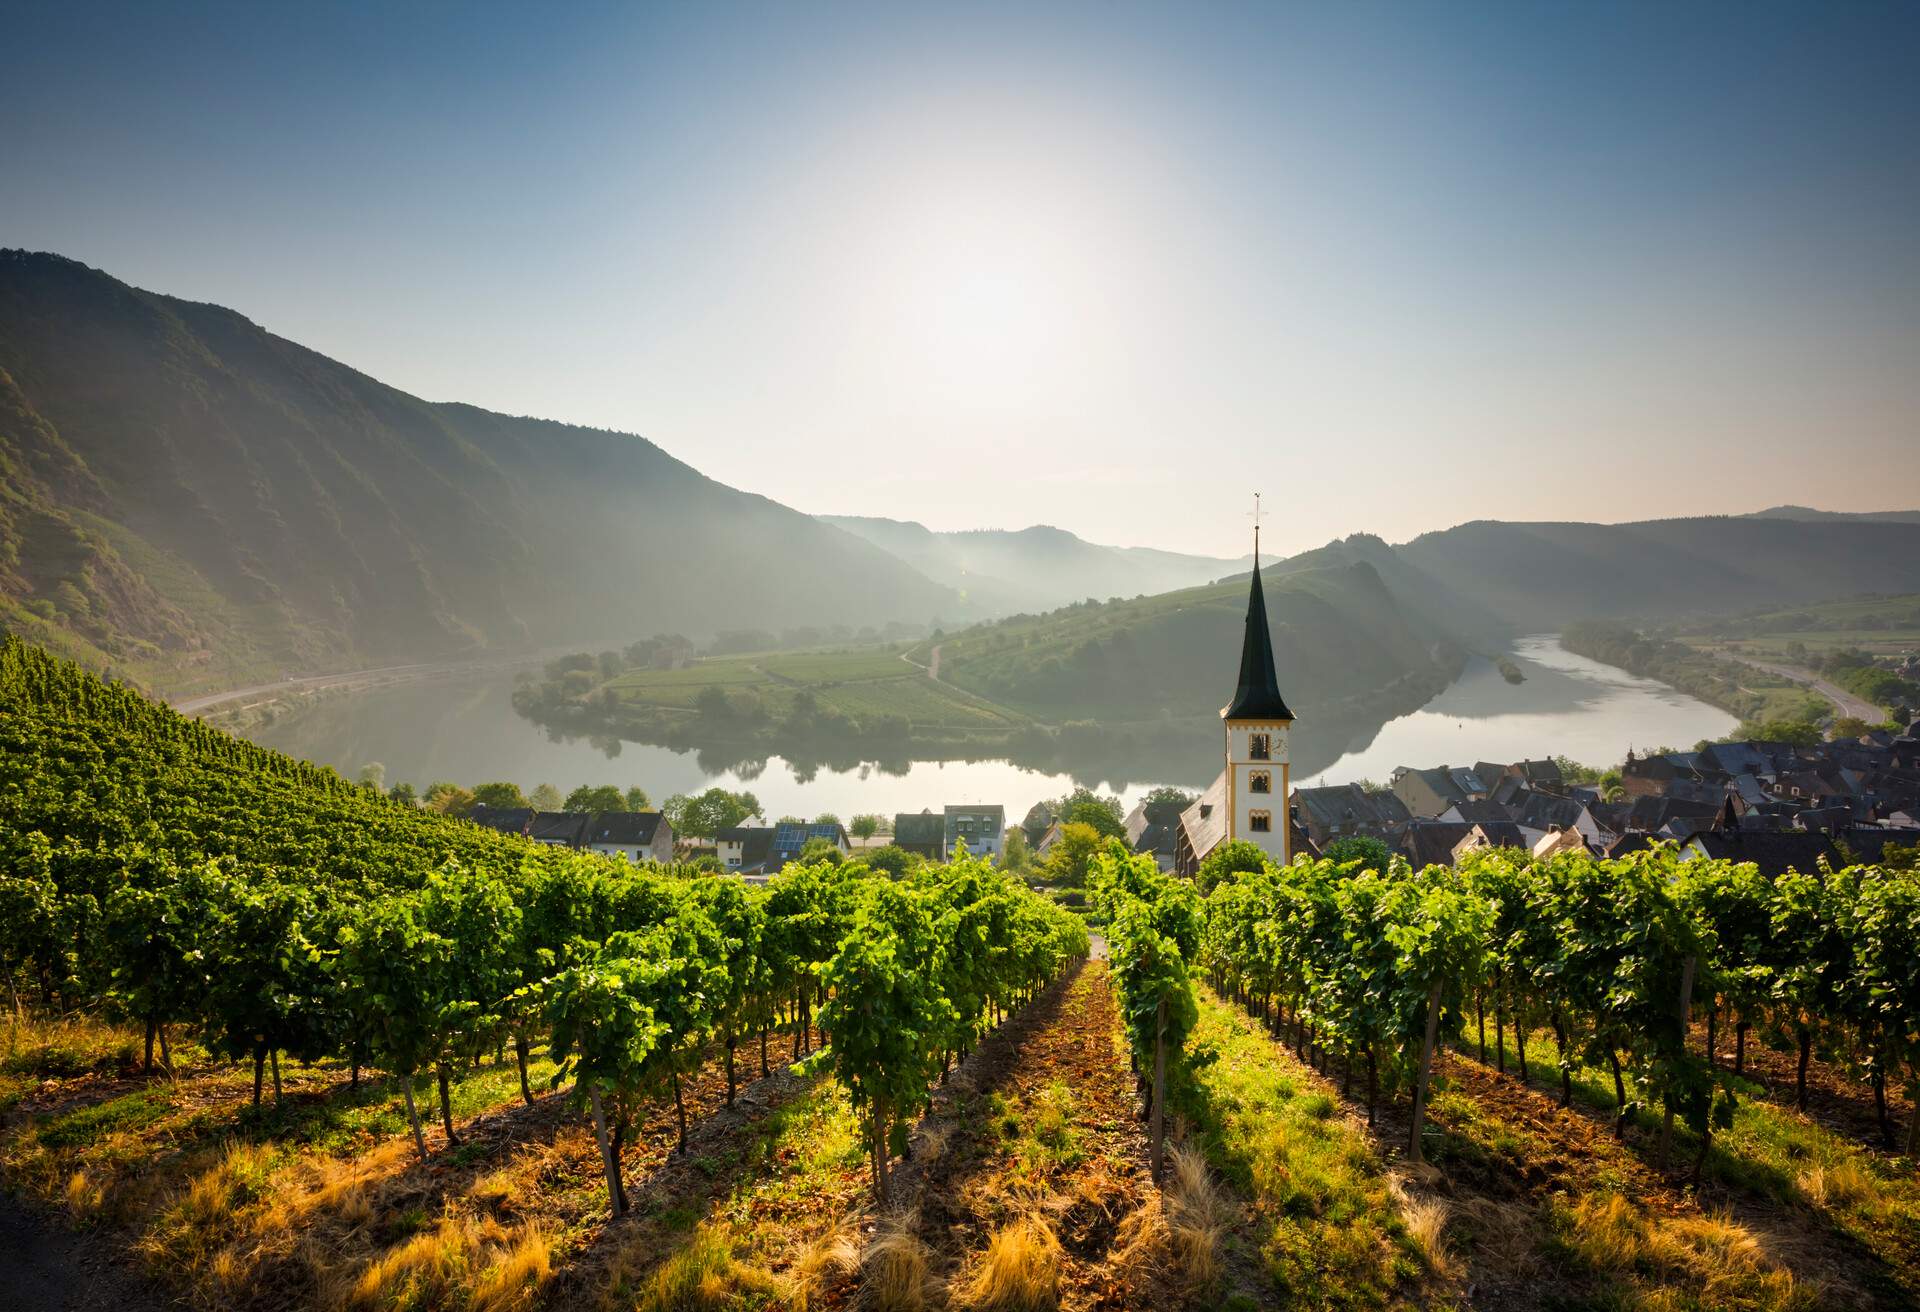 A church tower sticks out on the roof of houses, surrounded by a vineyard on a rolling hill overlooking a broad river at the base of the mountains.